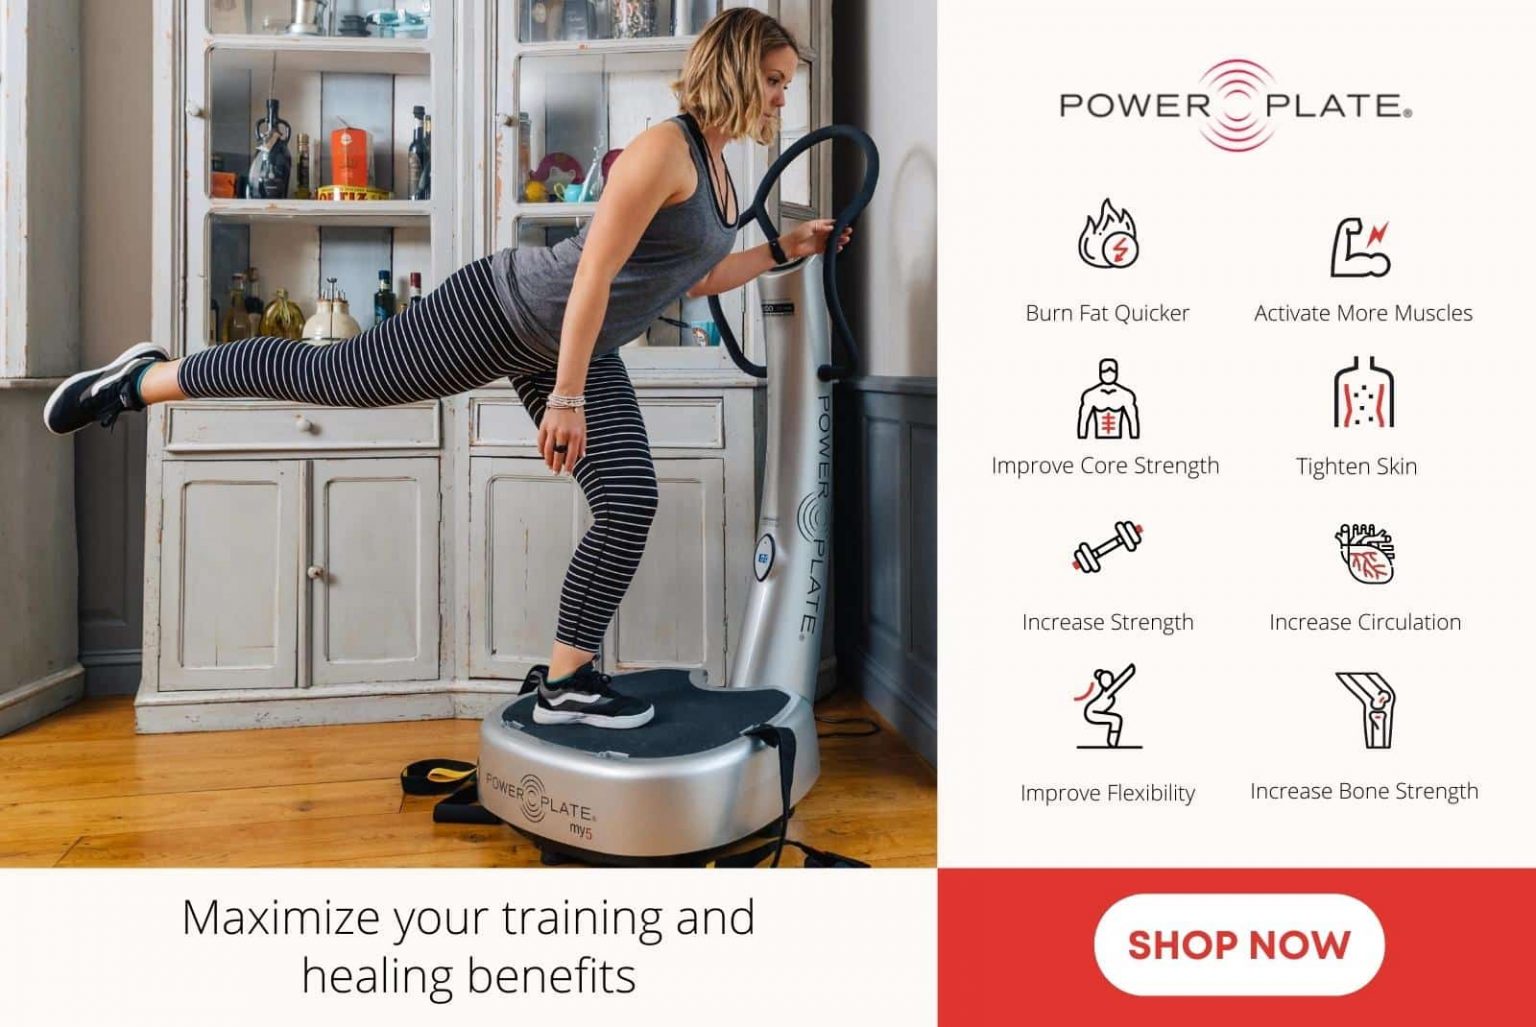 Maximize your training and health benefits with the Power Plate My5